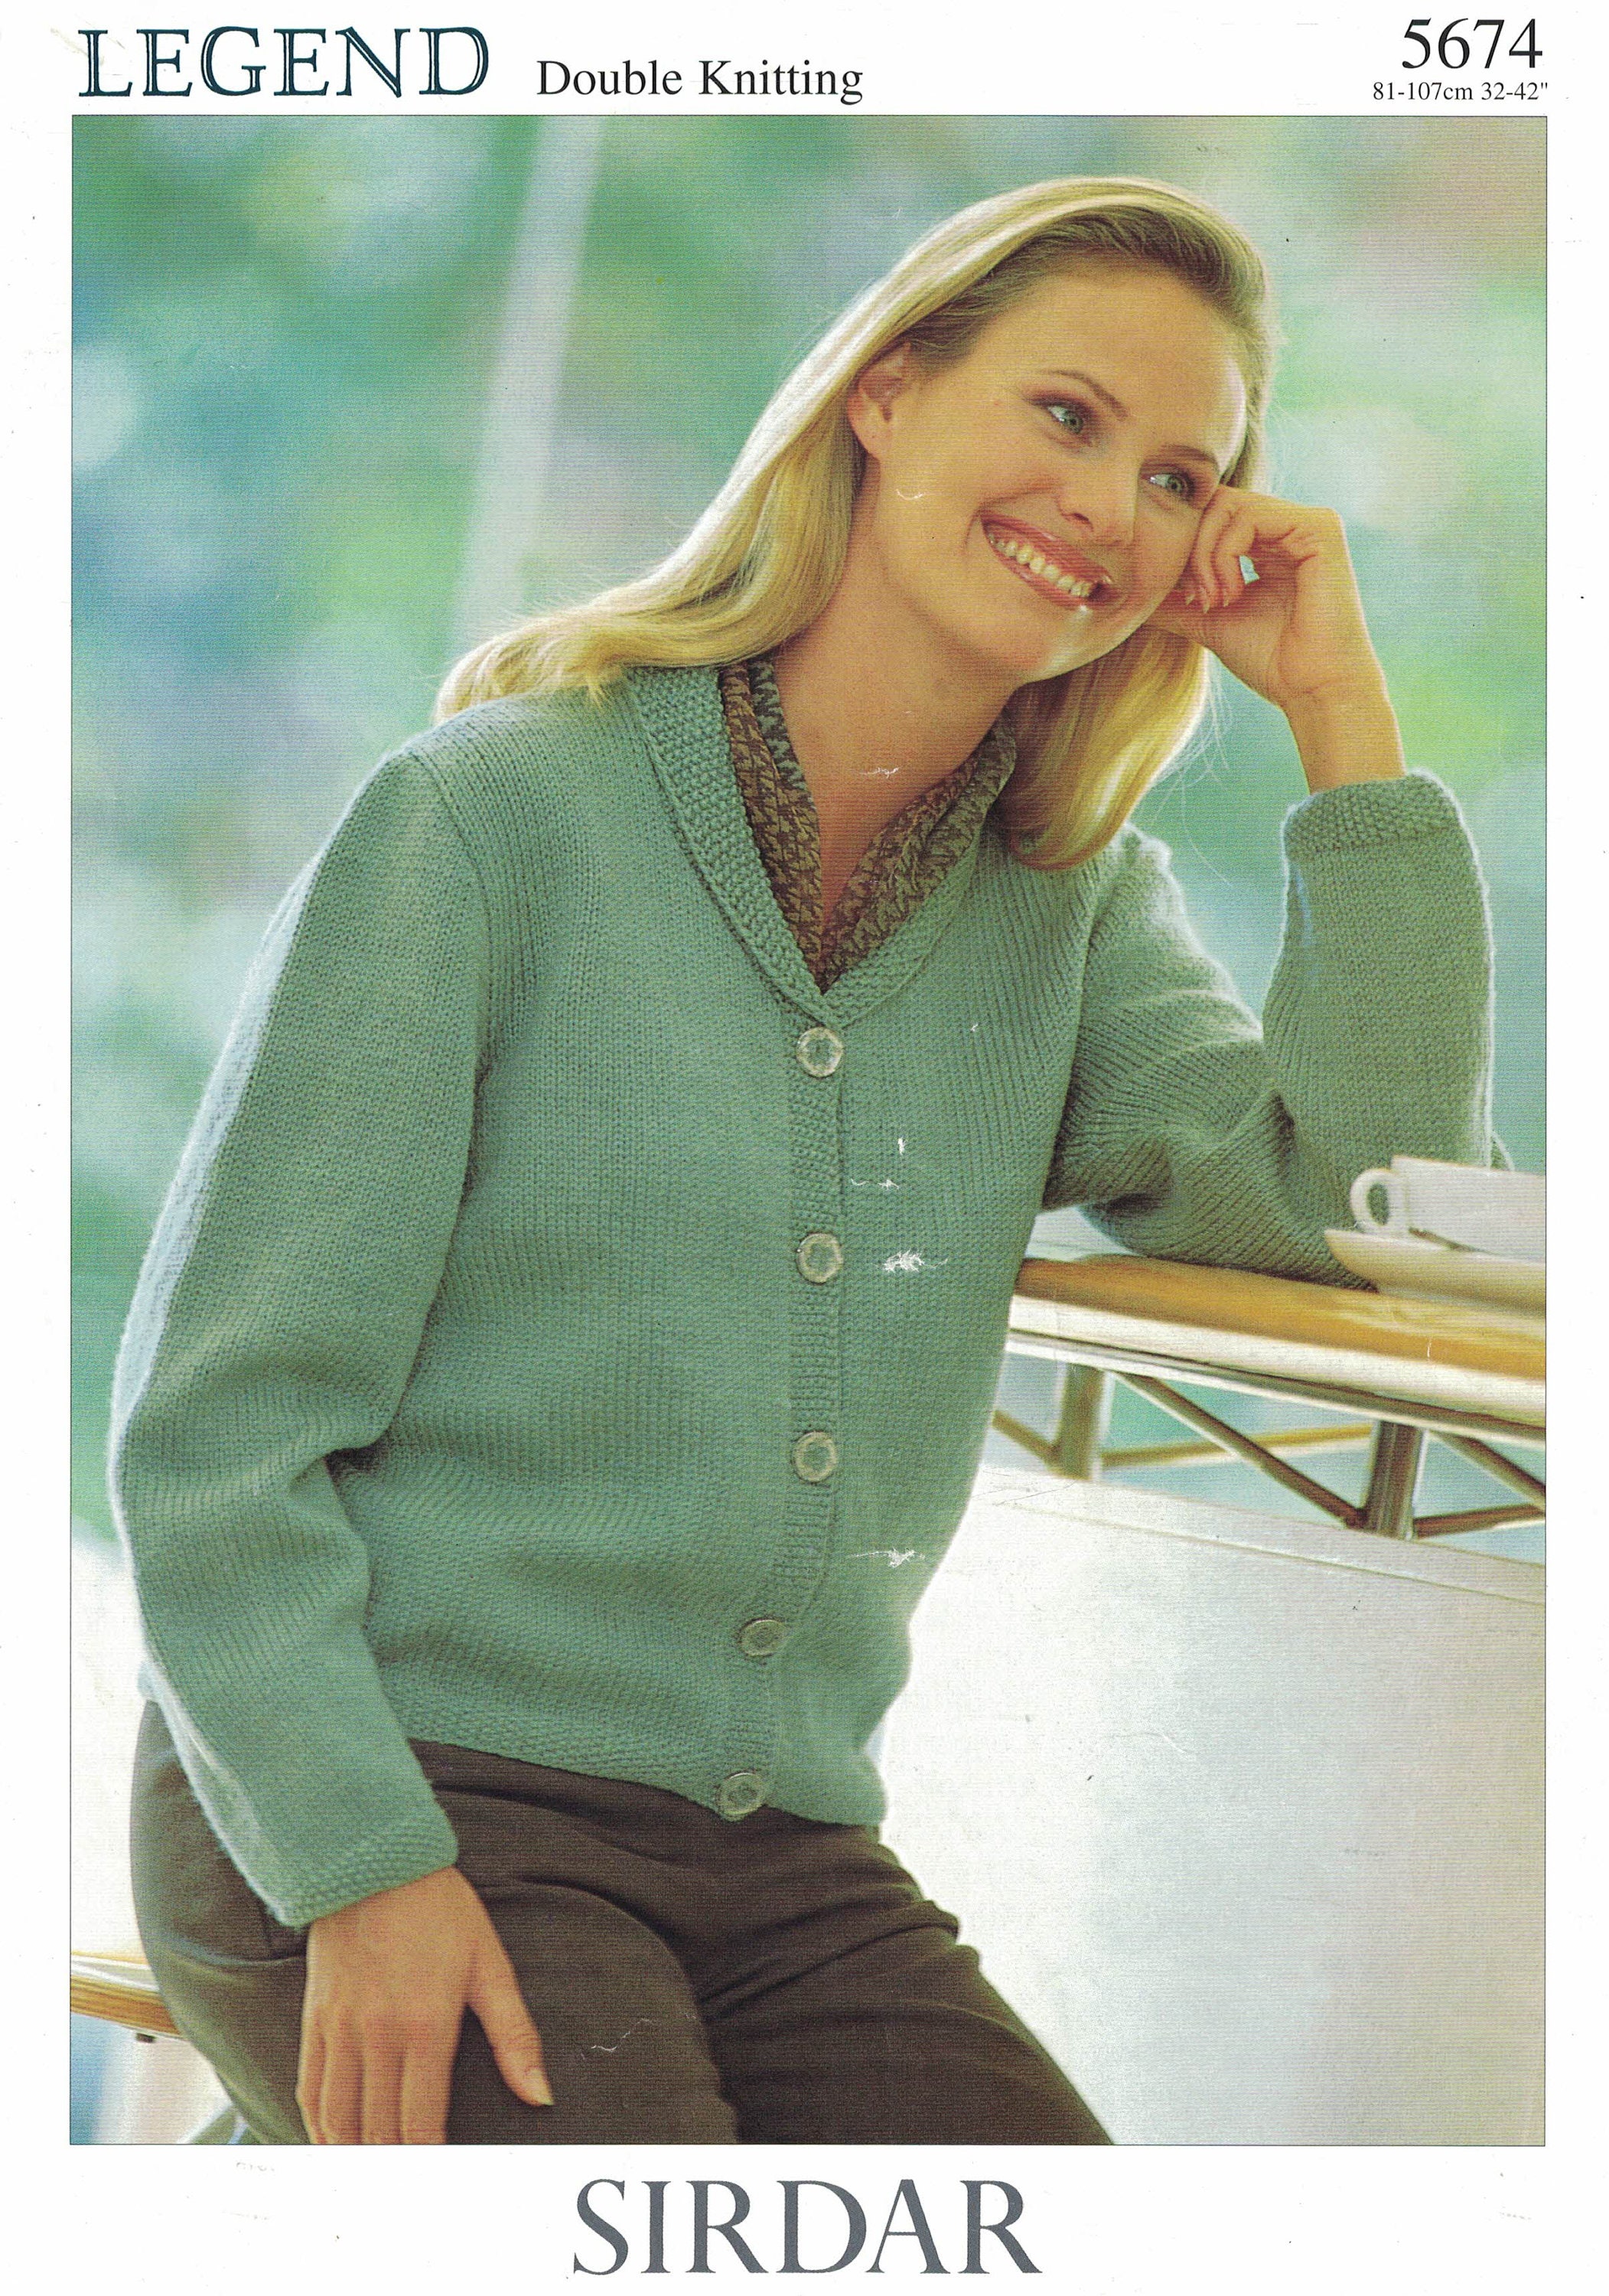 Vintage SIRDAR Knitting Pattern for a Ladies Collared Cardigan | Etsy